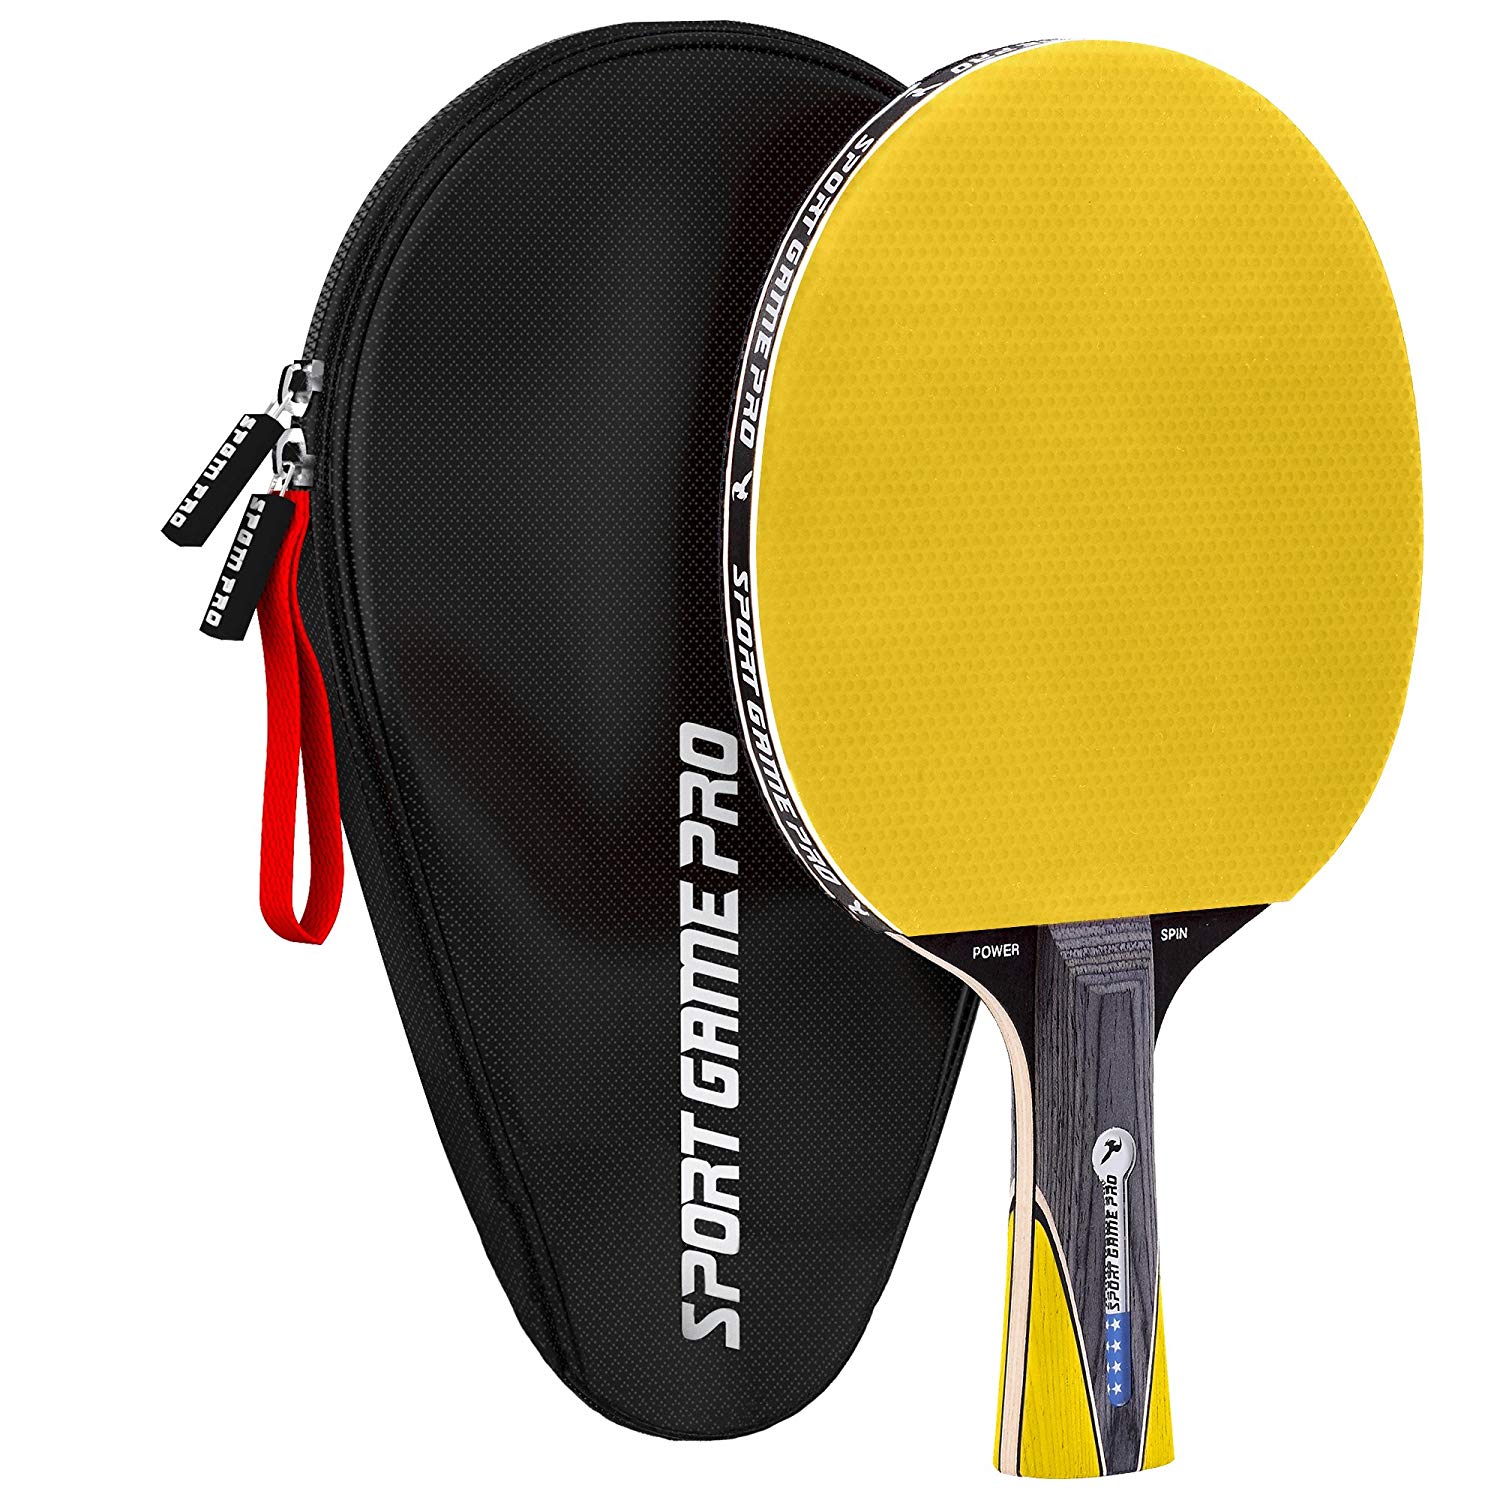 Ping Pong Paddle JT-700 with Killer Spin + Case for Free